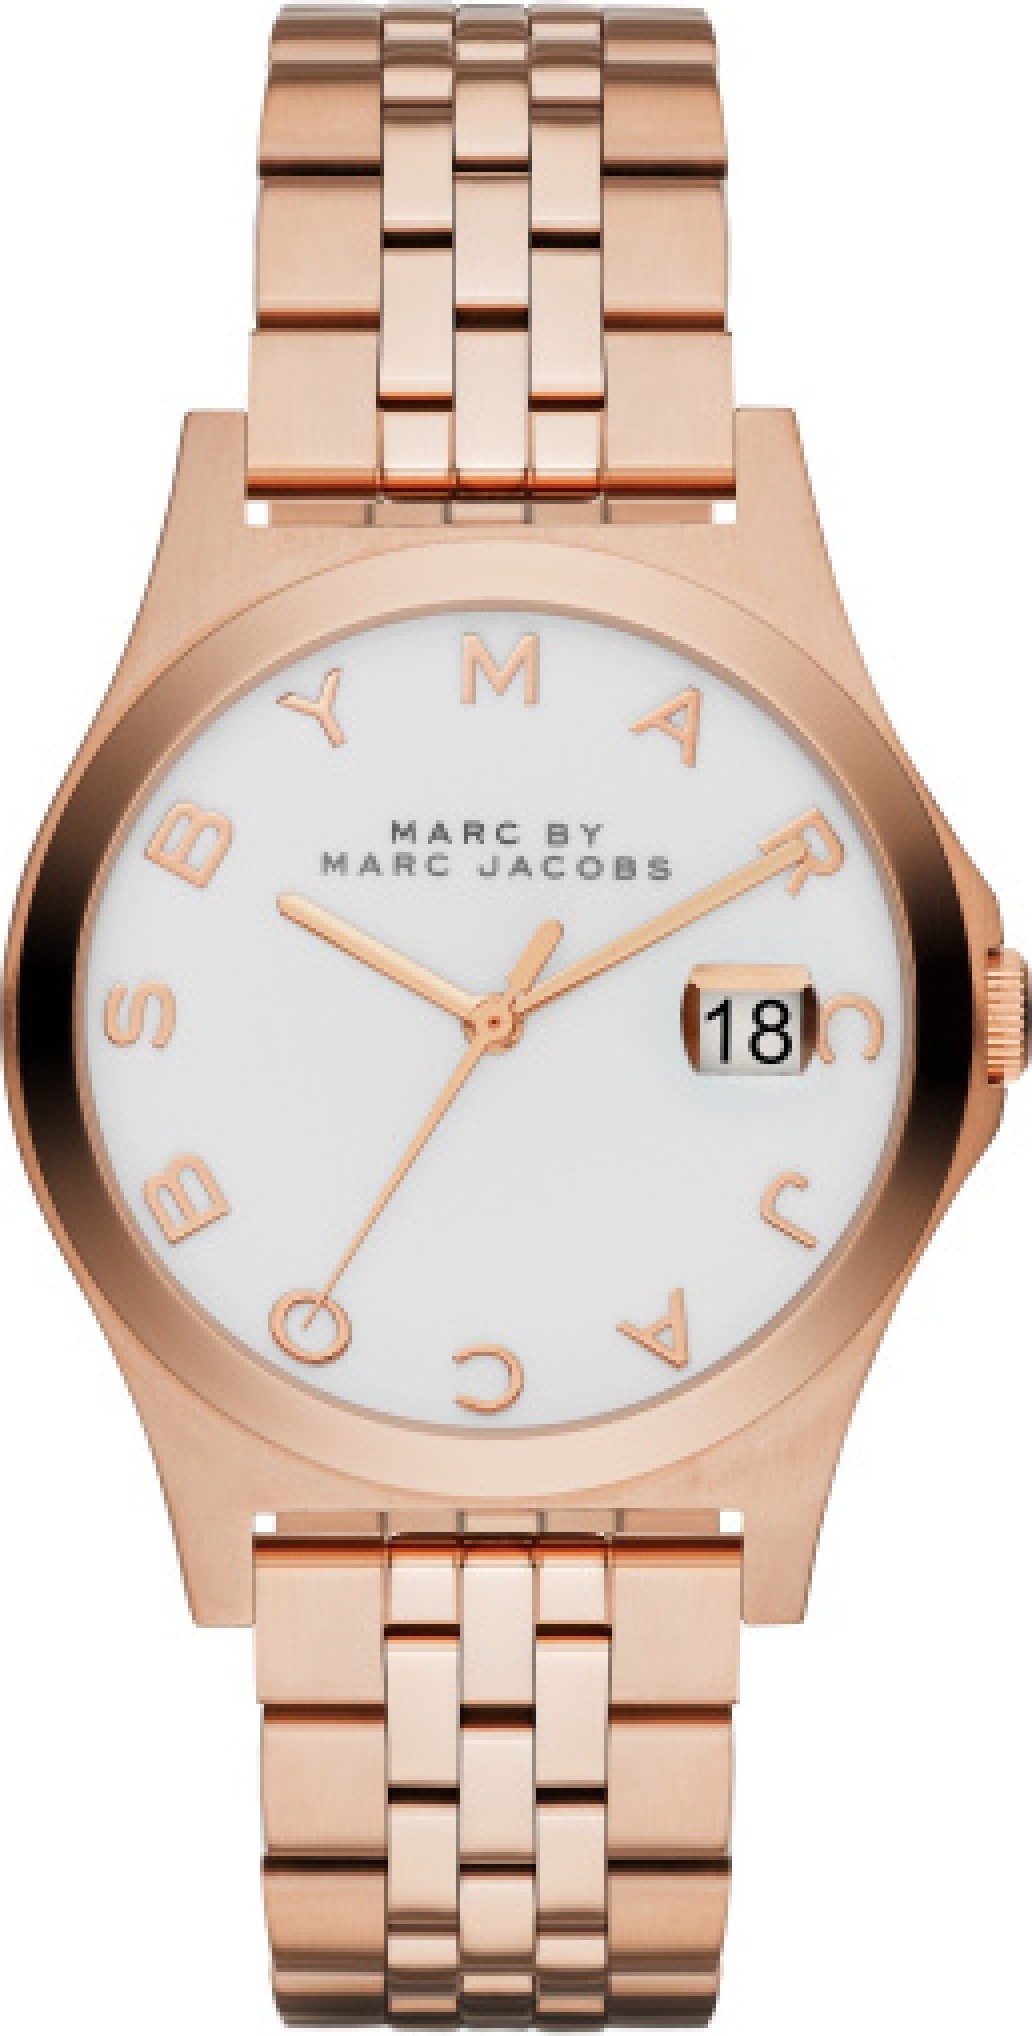 Marc By Marc Jacobs Mbm3392 'The Slim' Rose Gold-Tone Ladies Watch 36Mm